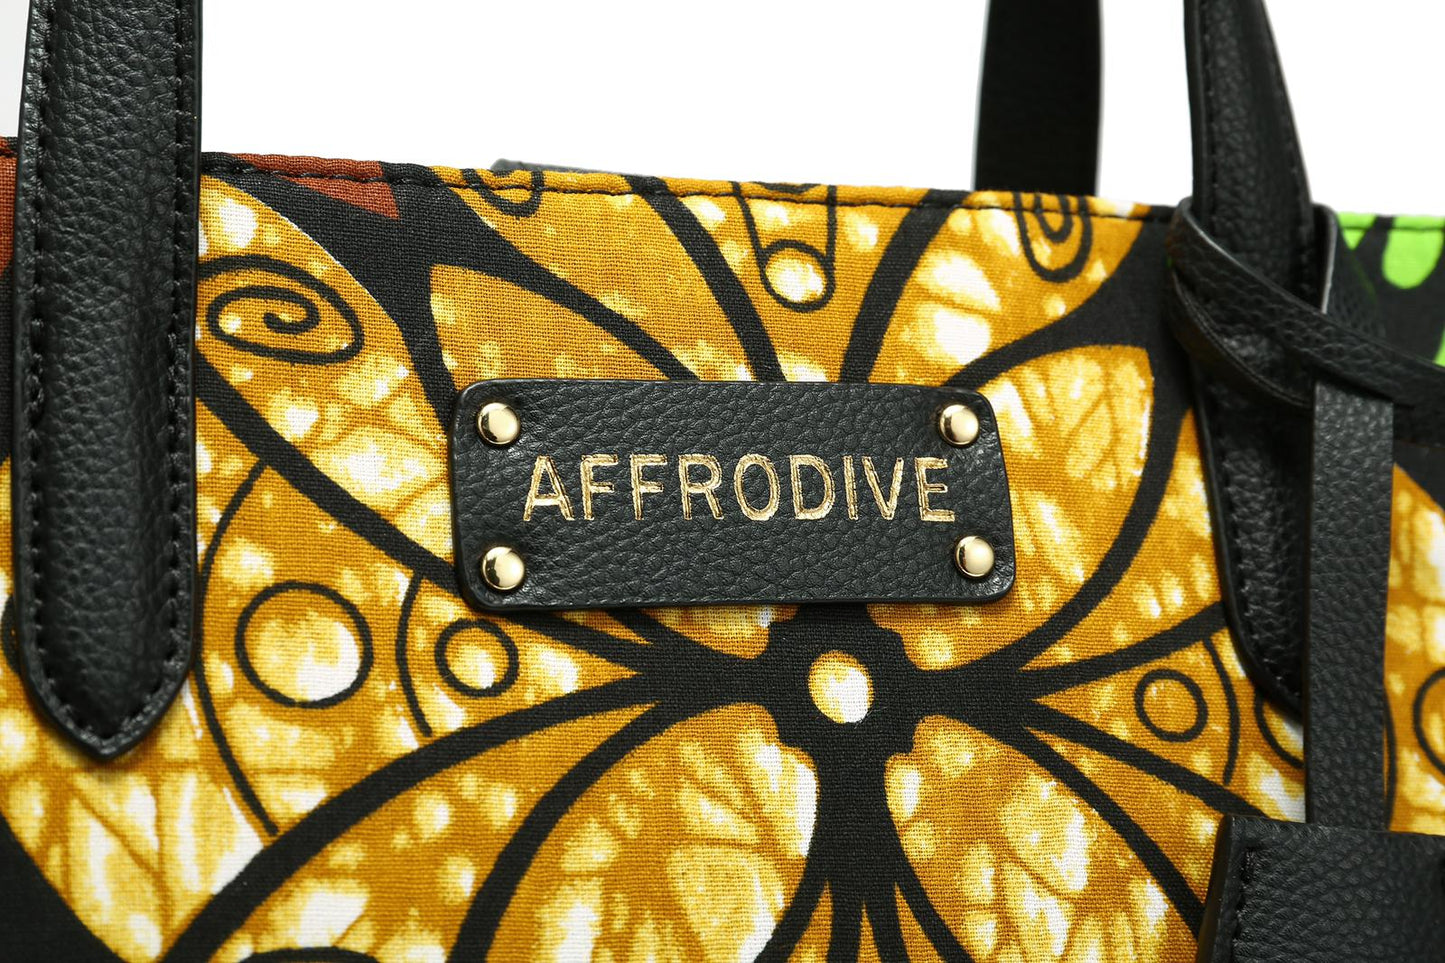 Gold,Brown Green Black and White Coloured African Ankara Print And Leather Handbag, Black Leather Handle, zipper, Spacious Easy to Handle African Print Handbag